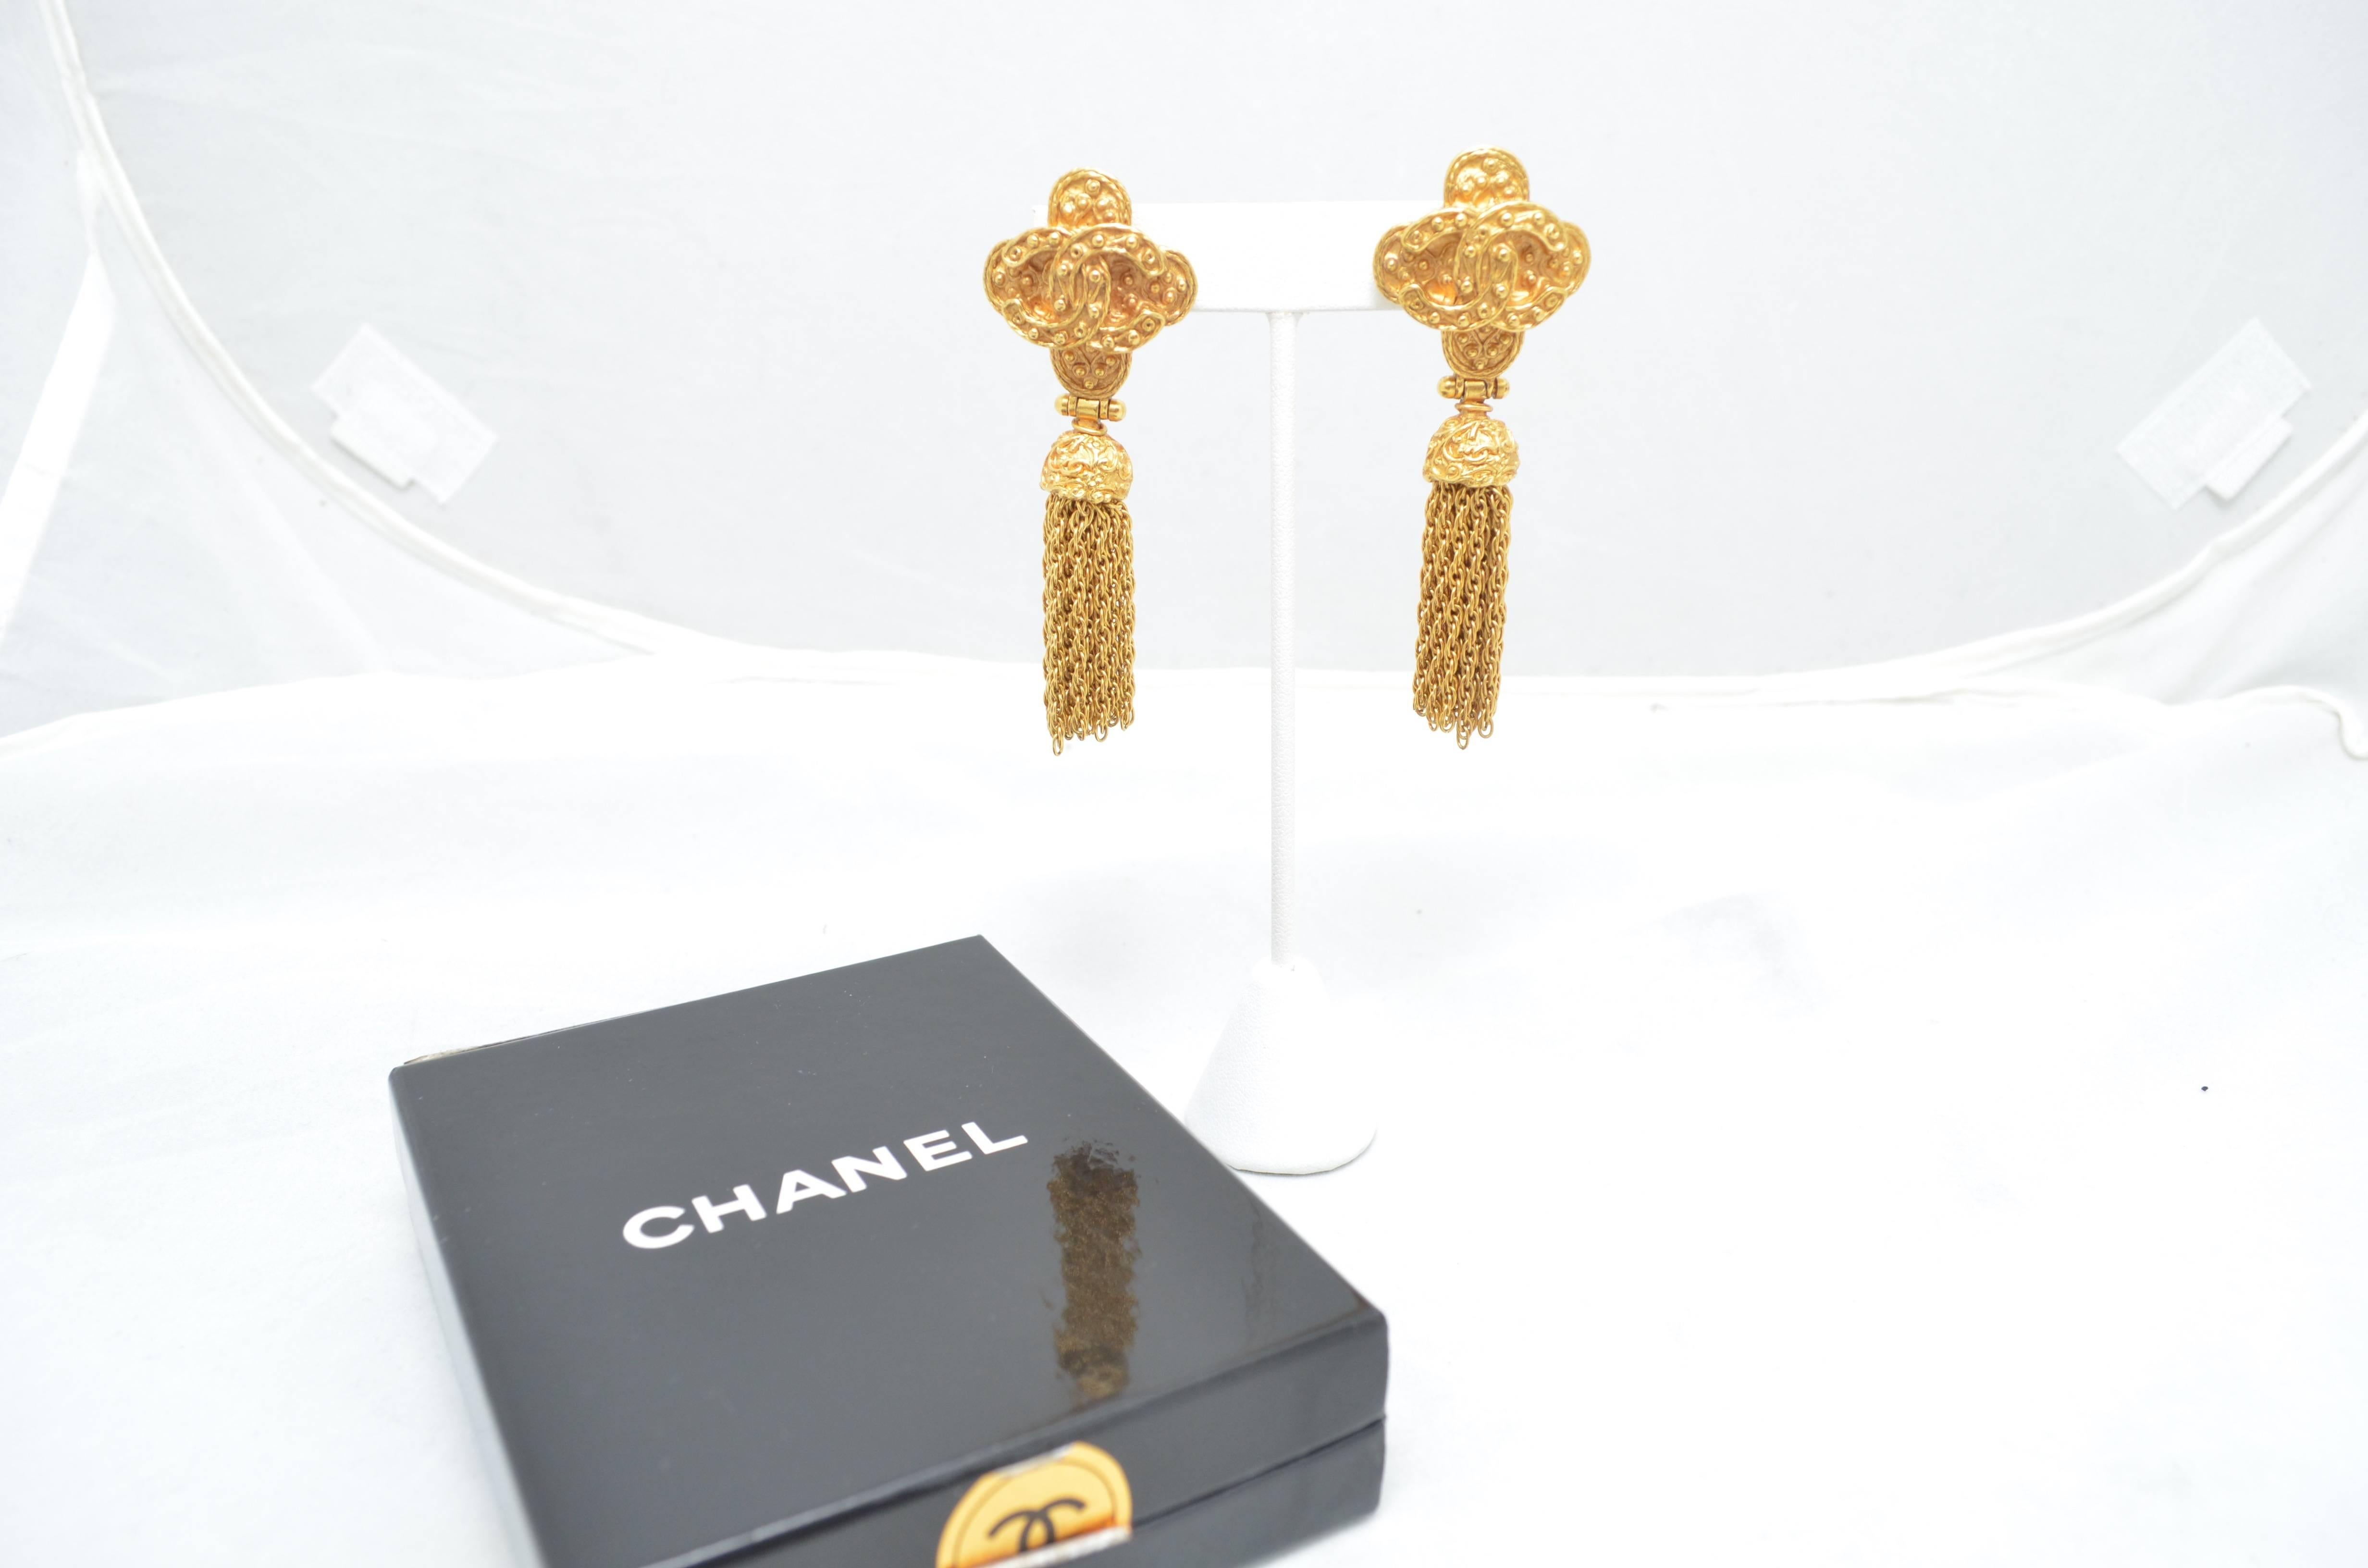 Vintage Channel tassel earrings with clip-on backs.  Gold tone metal. Chanel plaque stamped: Chanel 94A, Made in France. Excellent condition.

Measurements in inches:
Height: 3
Clip On Width: 1 1/8 